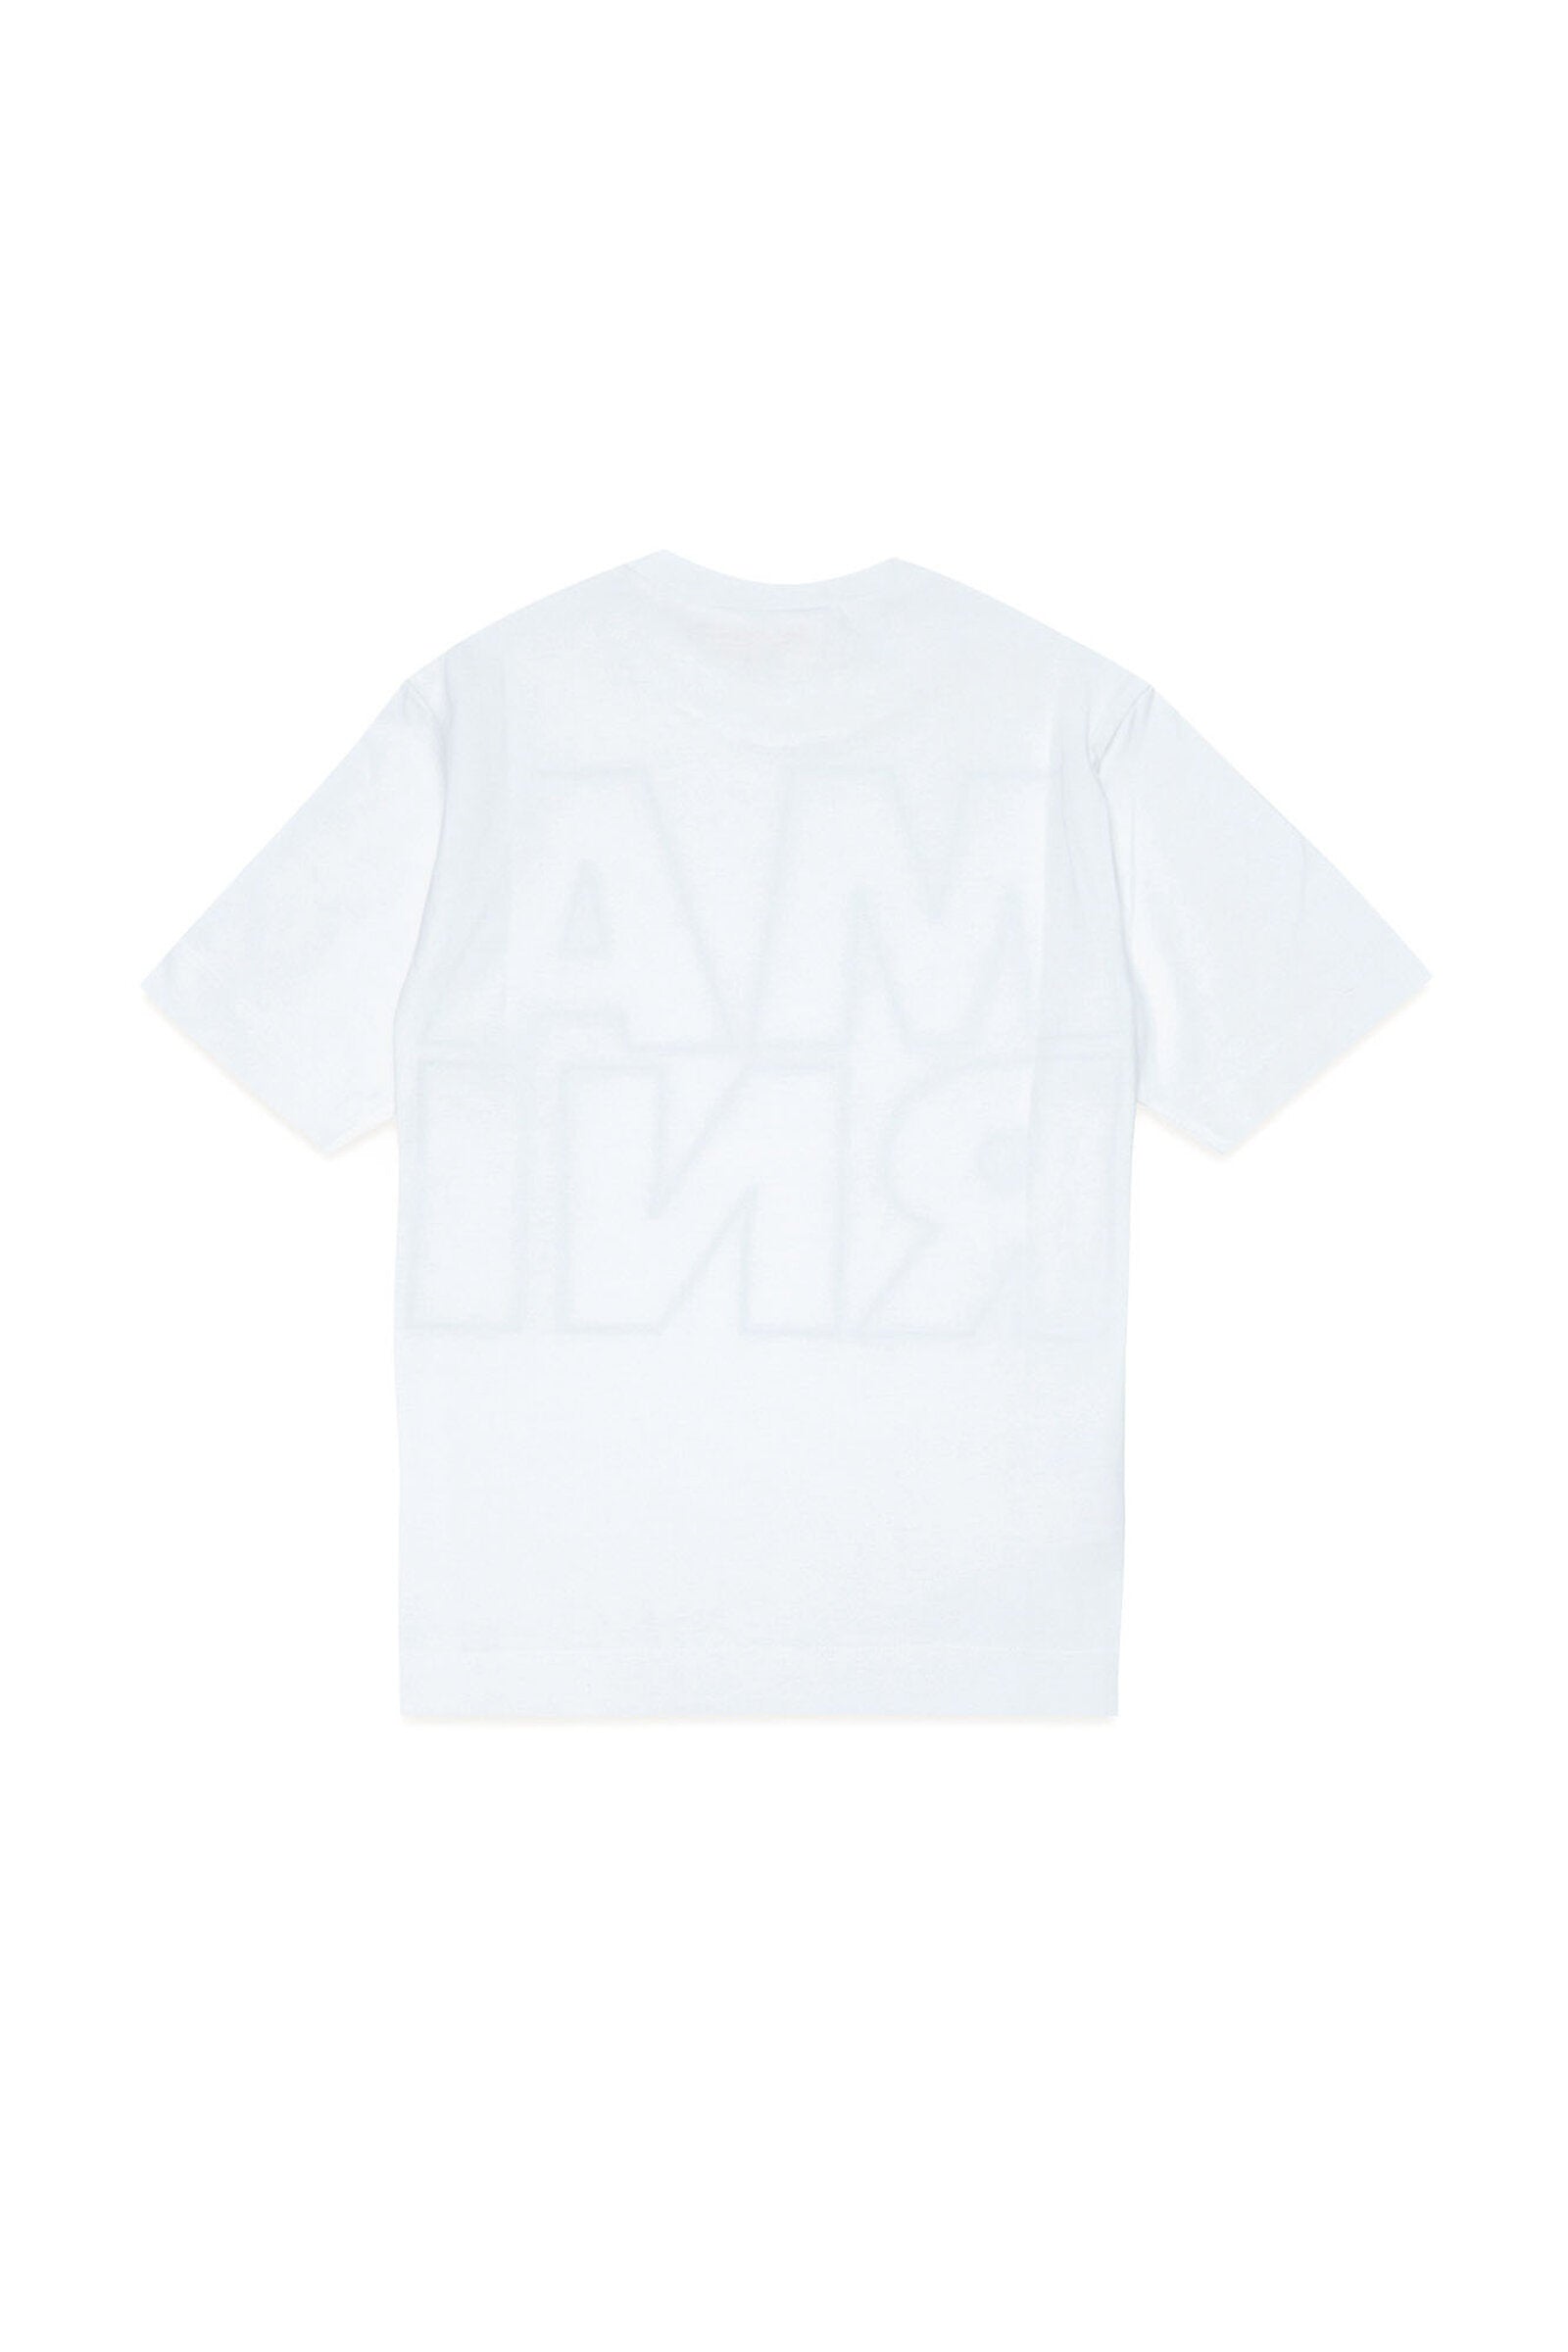 White t-shirt in jersey with displaced Marni logo